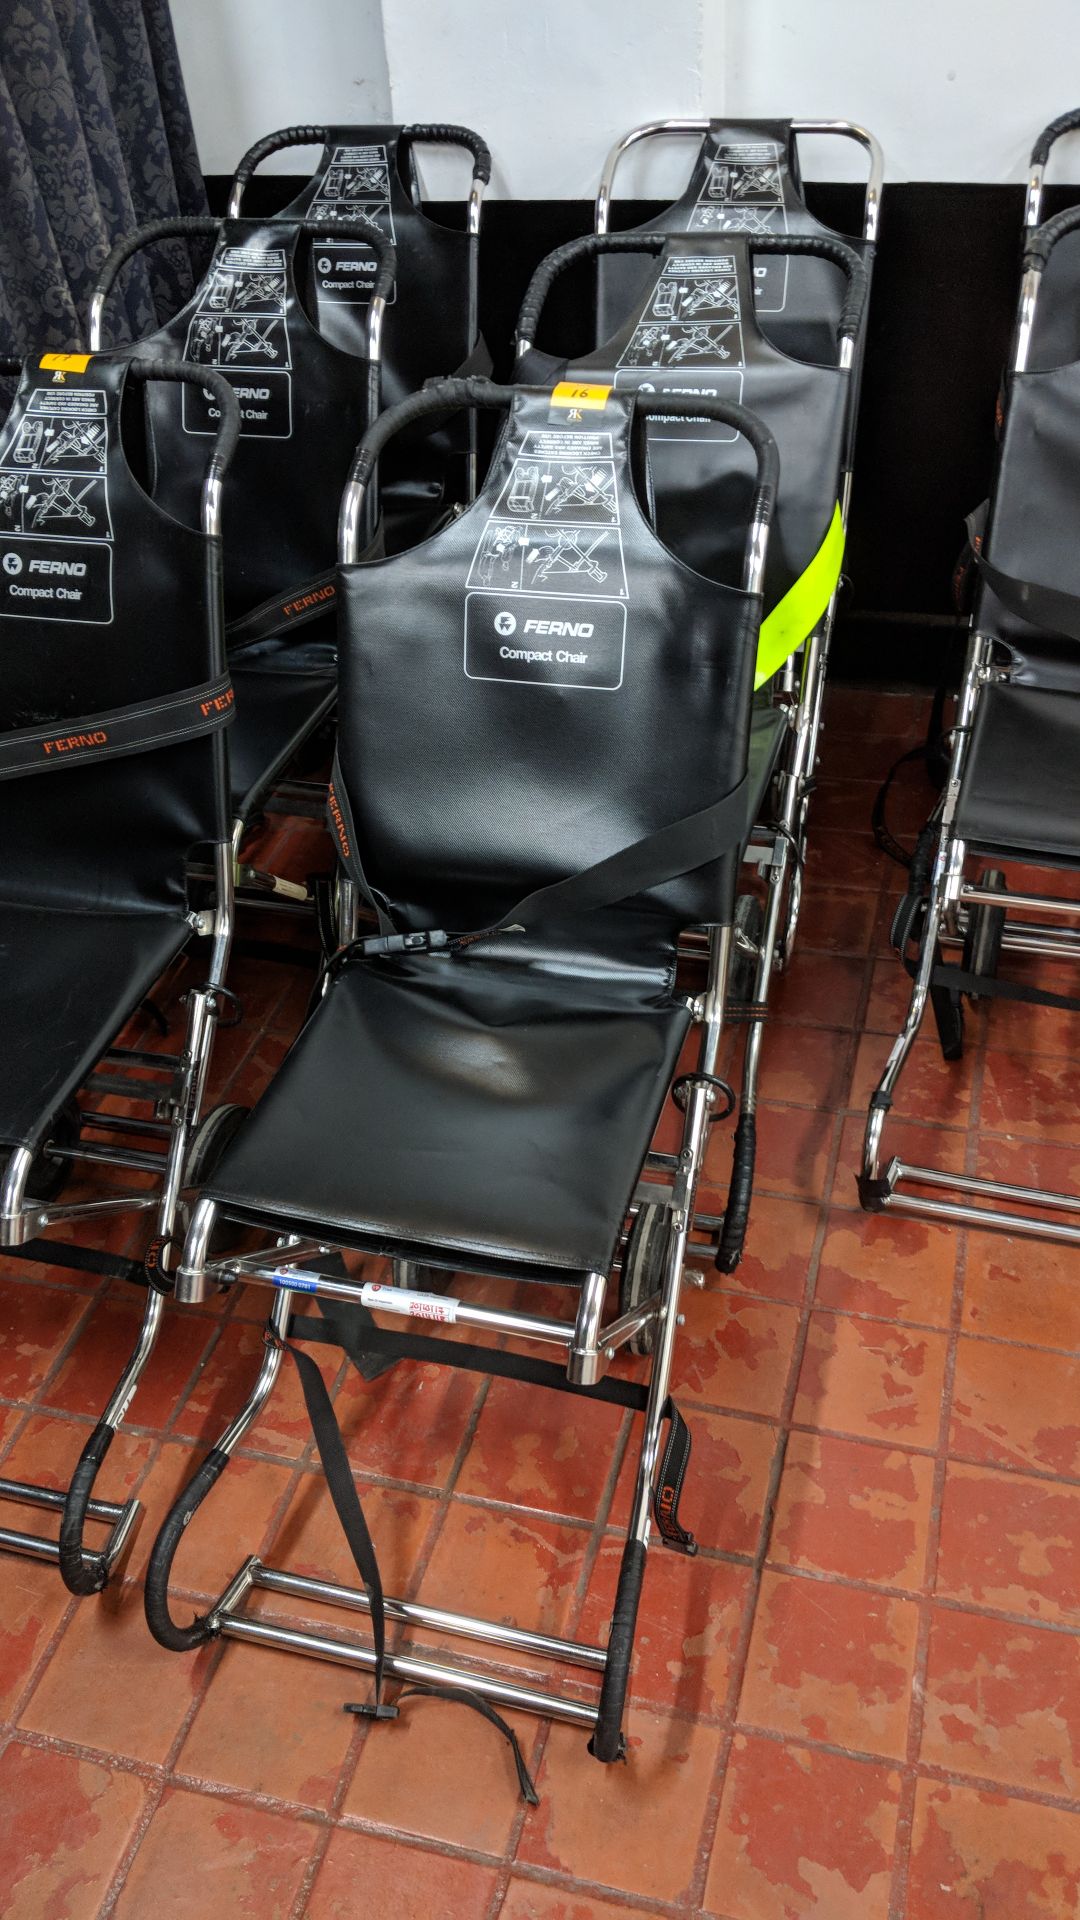 3 off Ferno Compact Carry Chairs in black. Internal reference 189091 IMPORTANT: Please remember